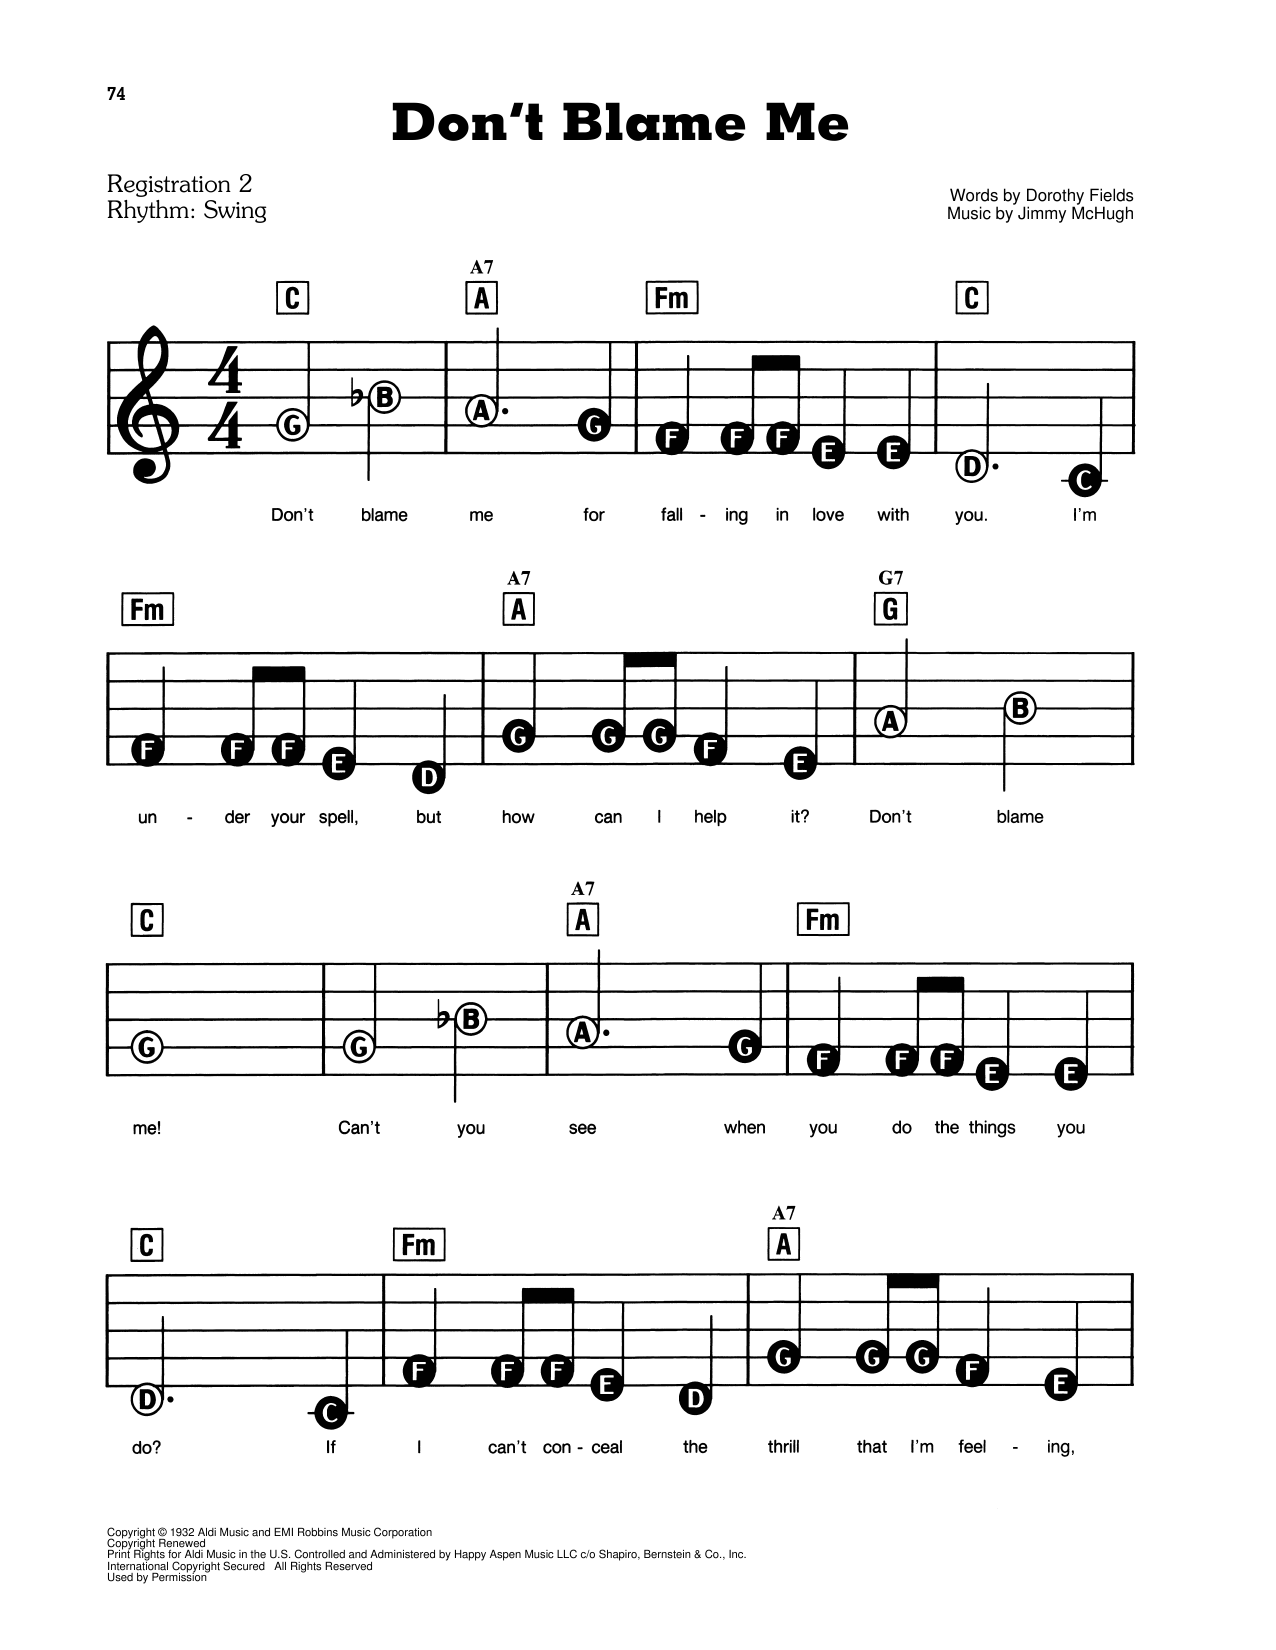 Dorothy Fields Don't Blame Me sheet music notes and chords. Download Printable PDF.